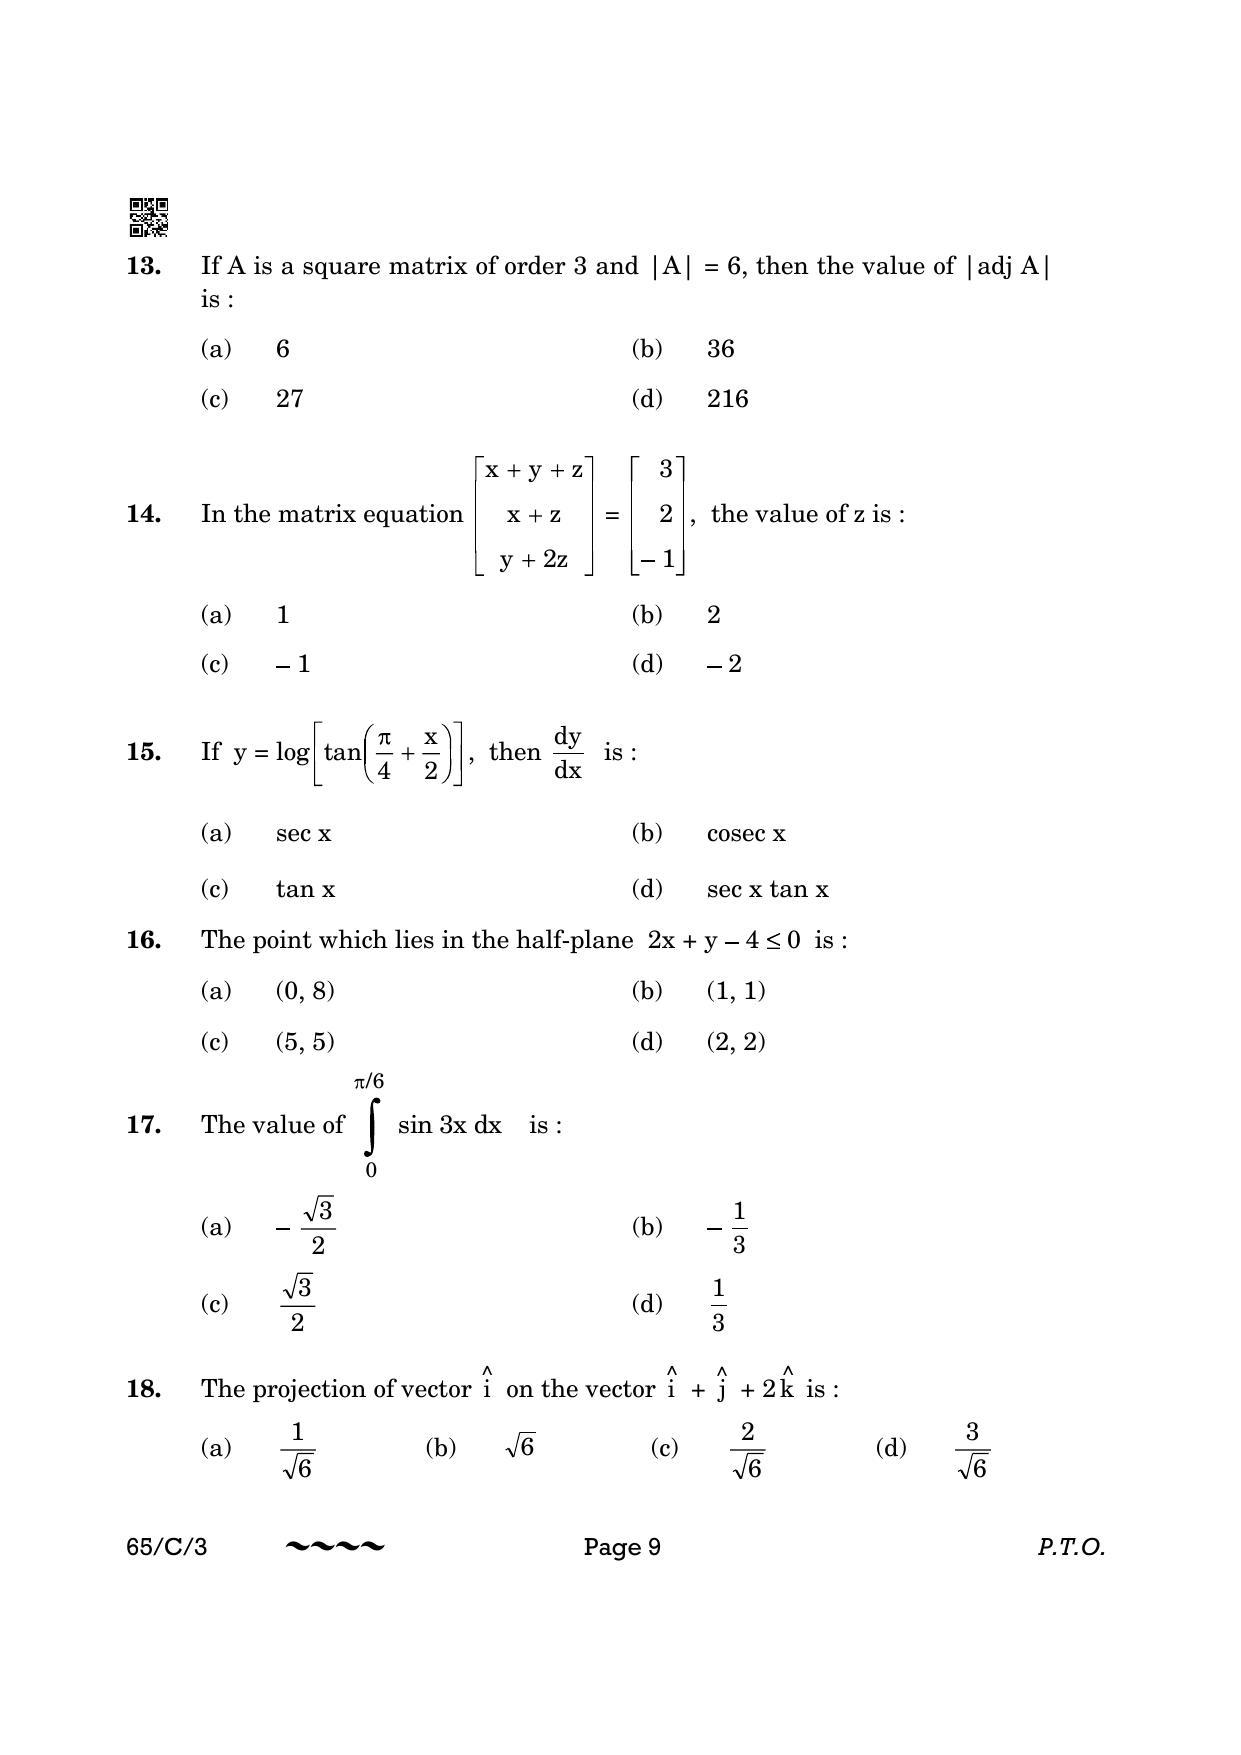 CBSE Class 12 65-3- Mathematics 2023 (Compartment) Question Paper - Page 9